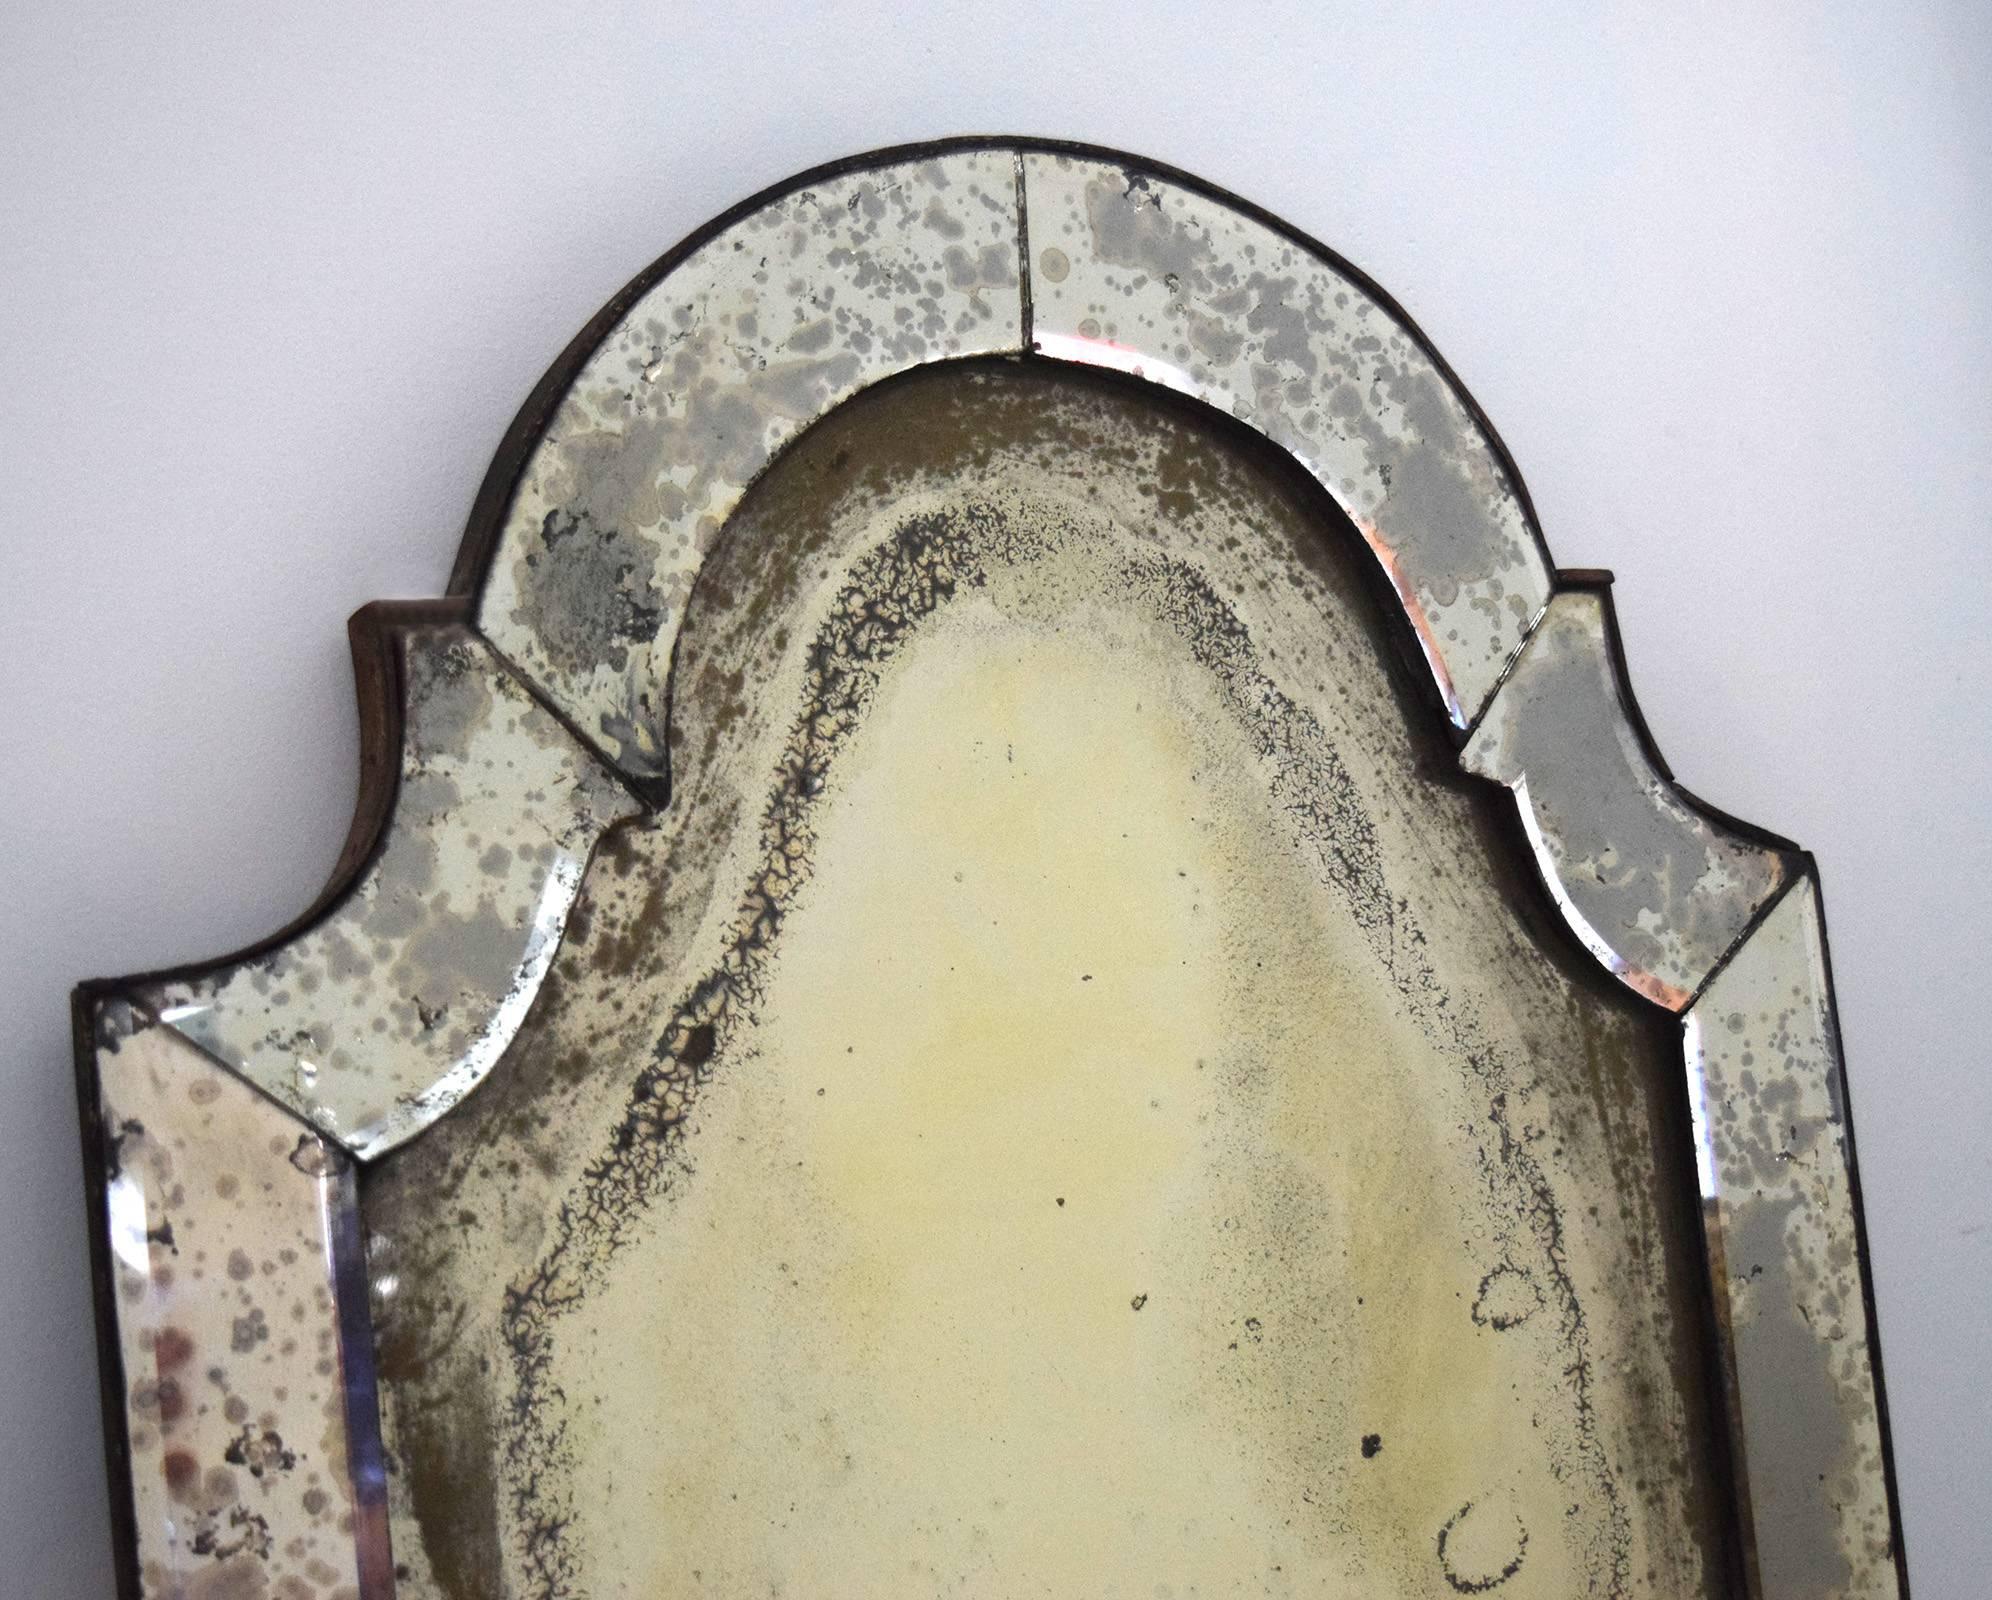 This charming mirror-framed mirror dates to the early 18th century, is probably German or Baltic, showing the English influence among the Hanseatic League cities. All of the original mirror plates have miraculously survived, and acquired a lovely